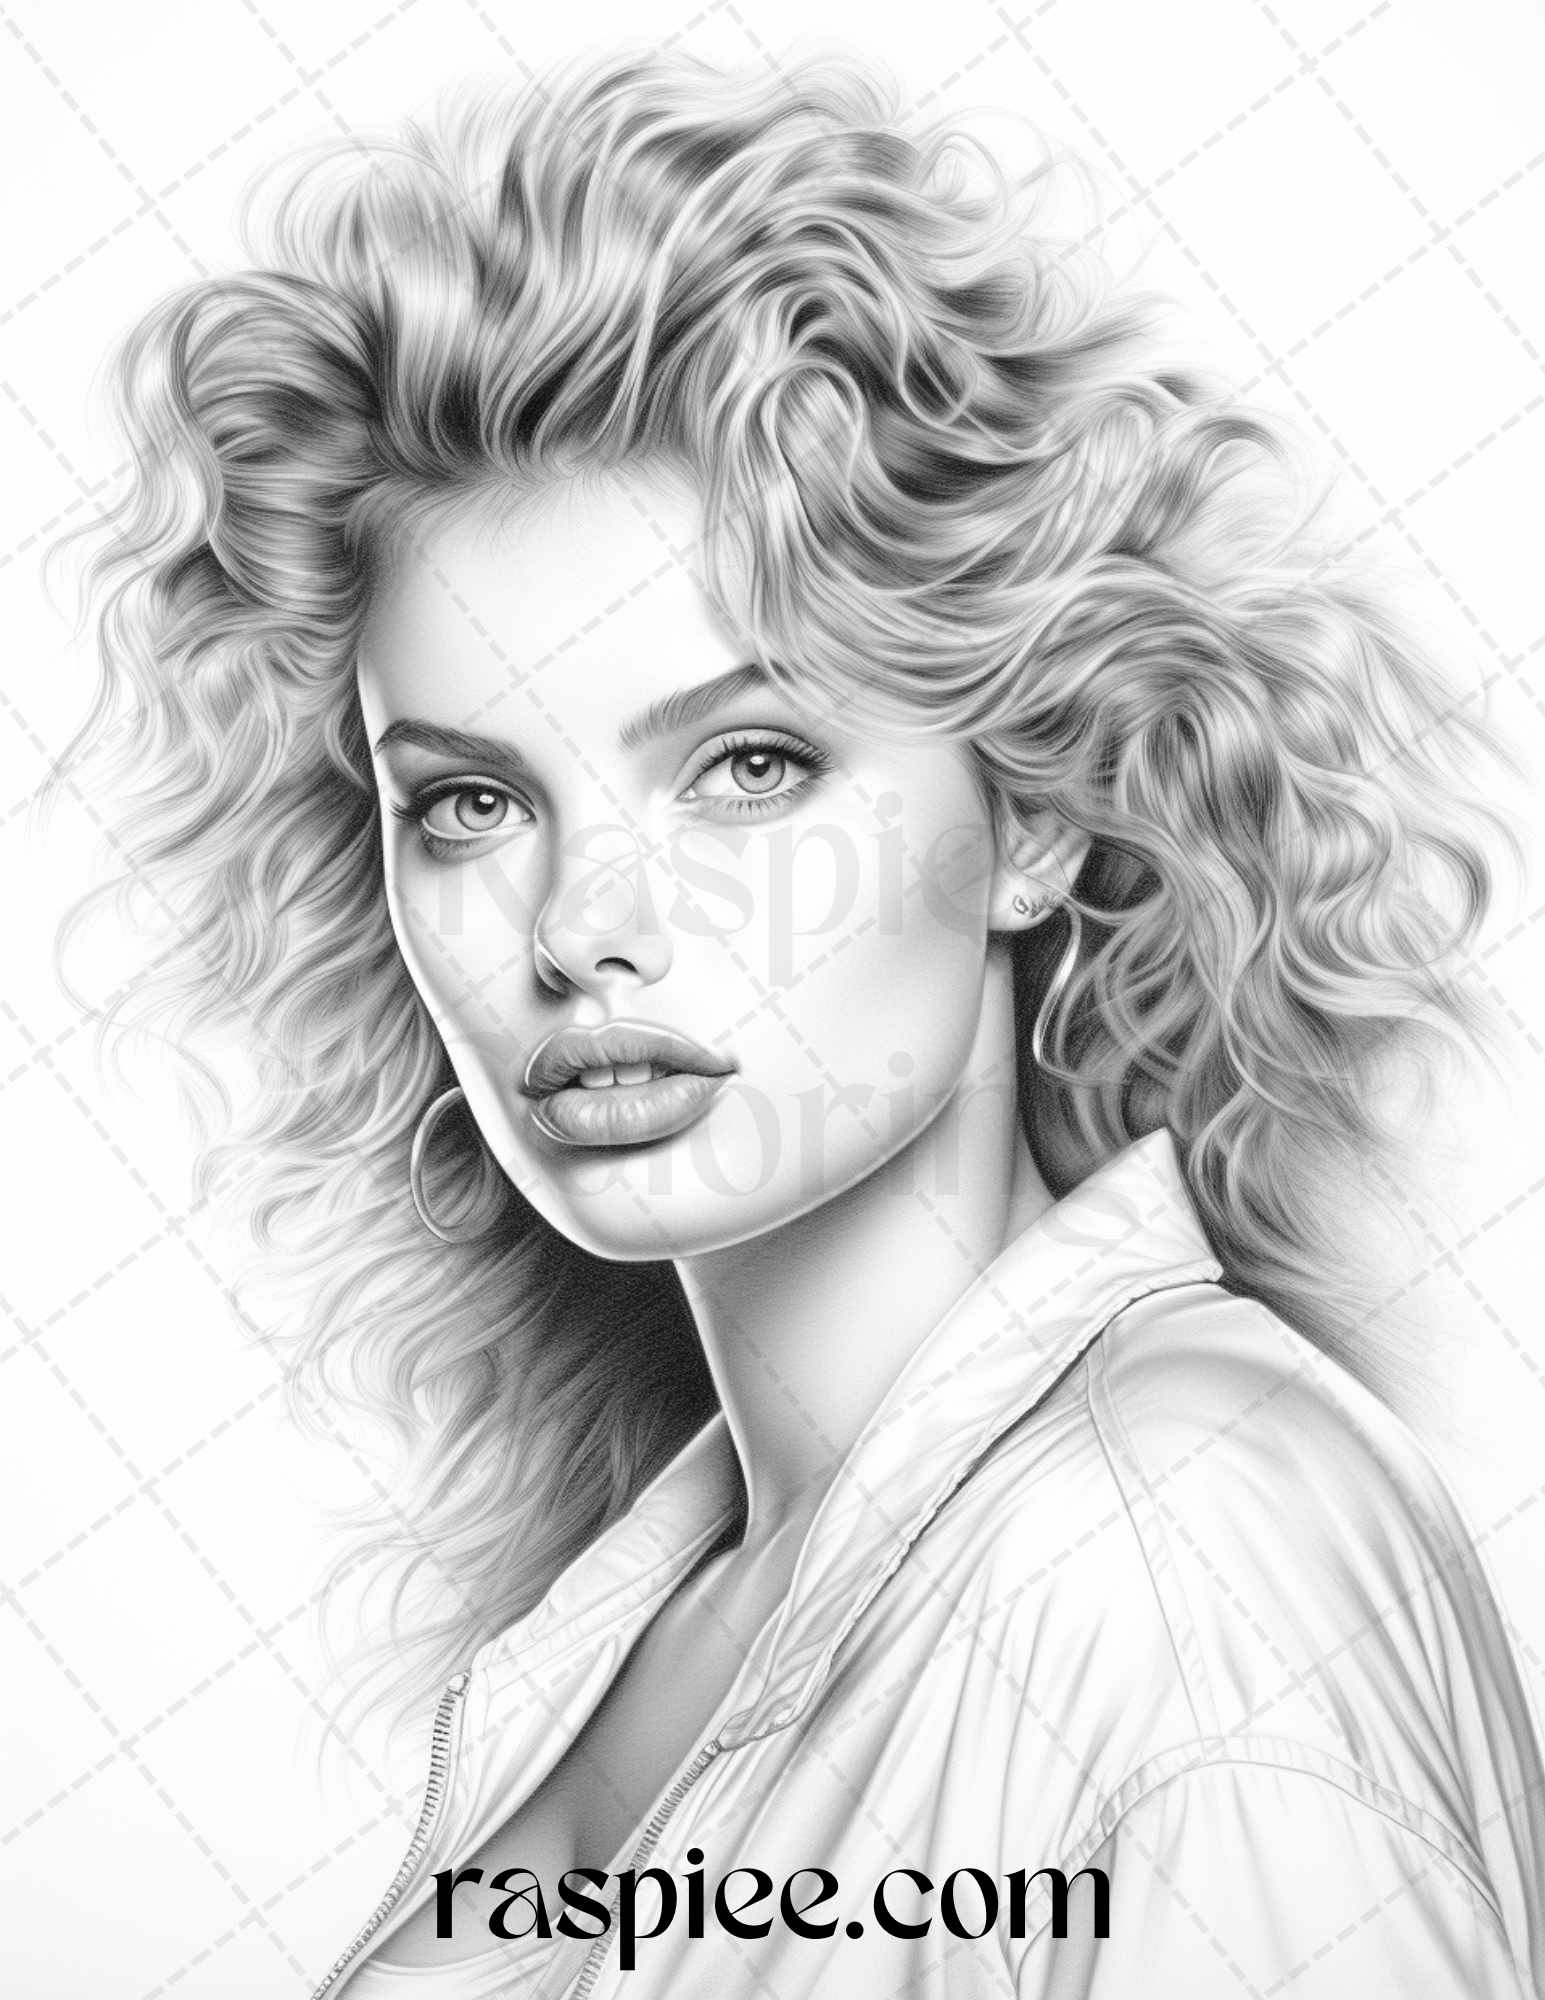 1980s beautiful women coloring pages, grayscale retro art printable, vintage style adult coloring, nostalgic black and white portraits